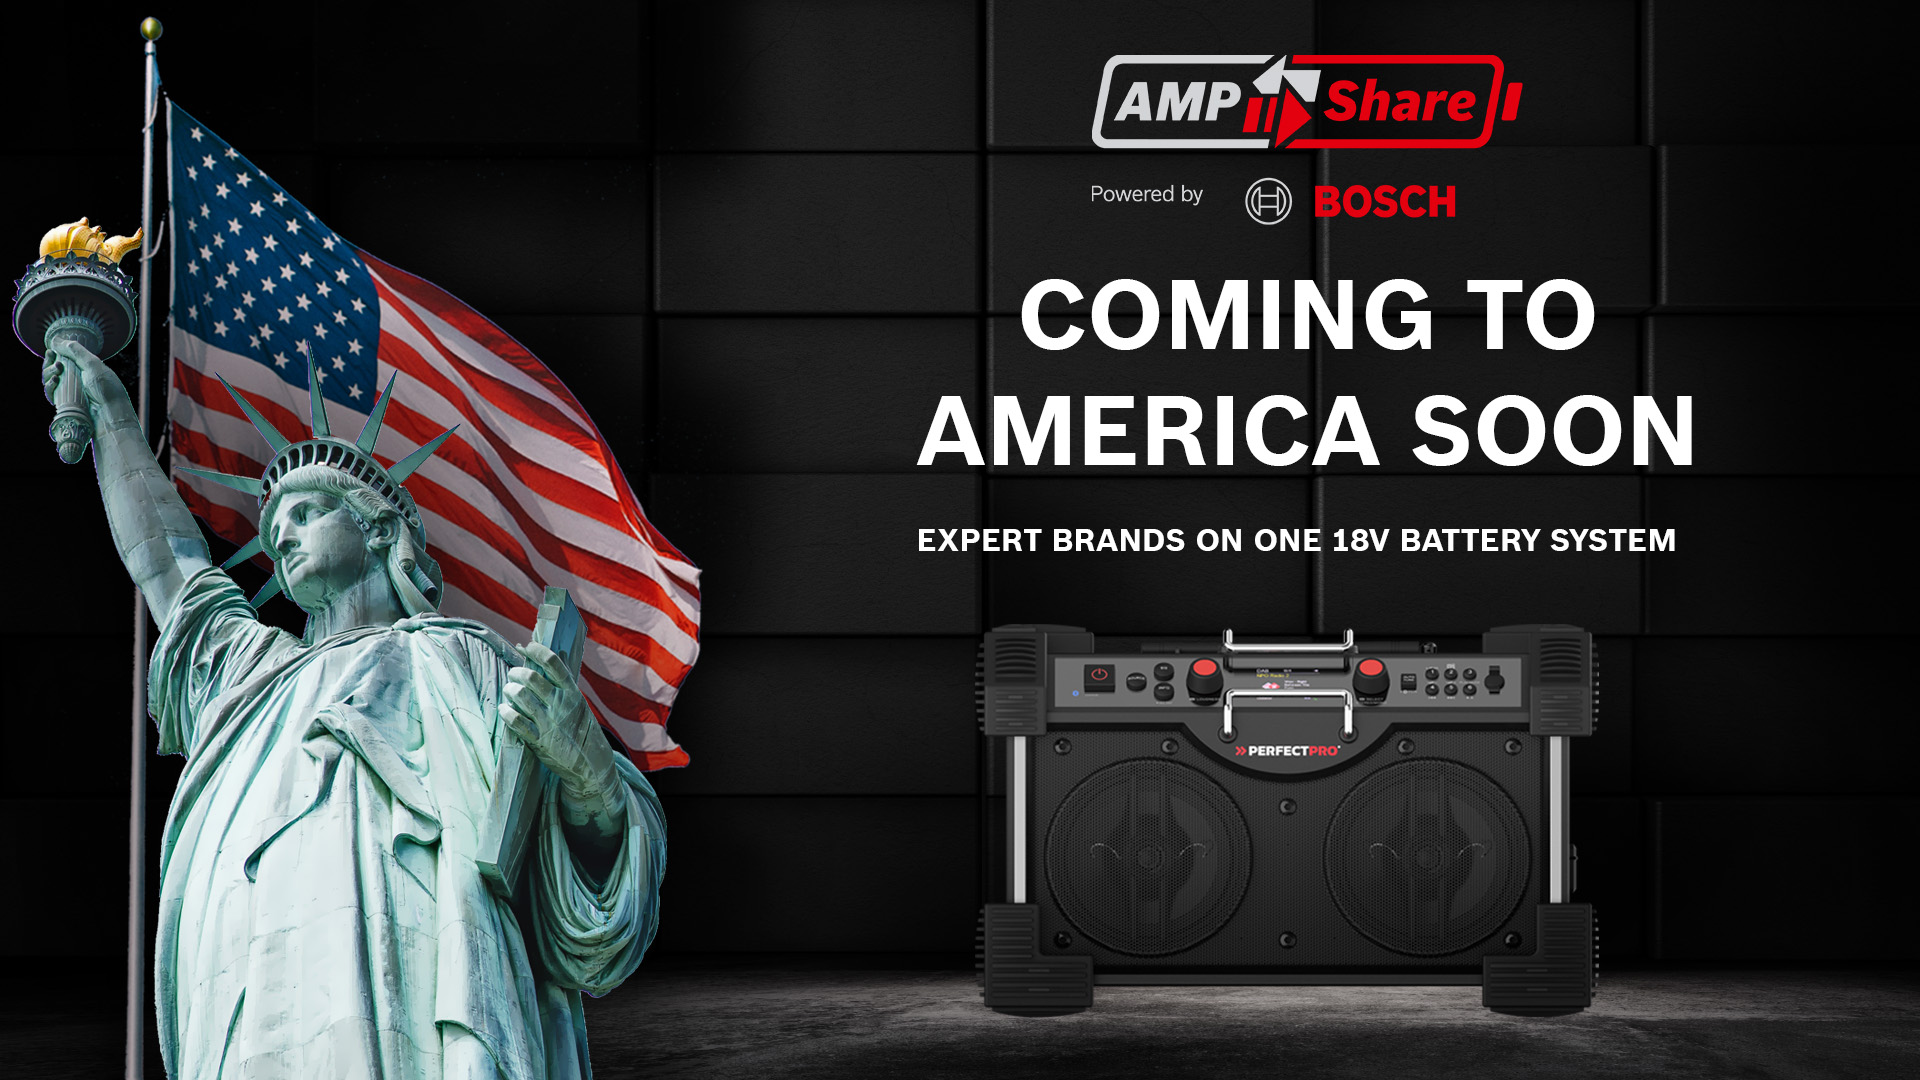 AMPShare – Powered by Bosch Professional launch in Canada and USA